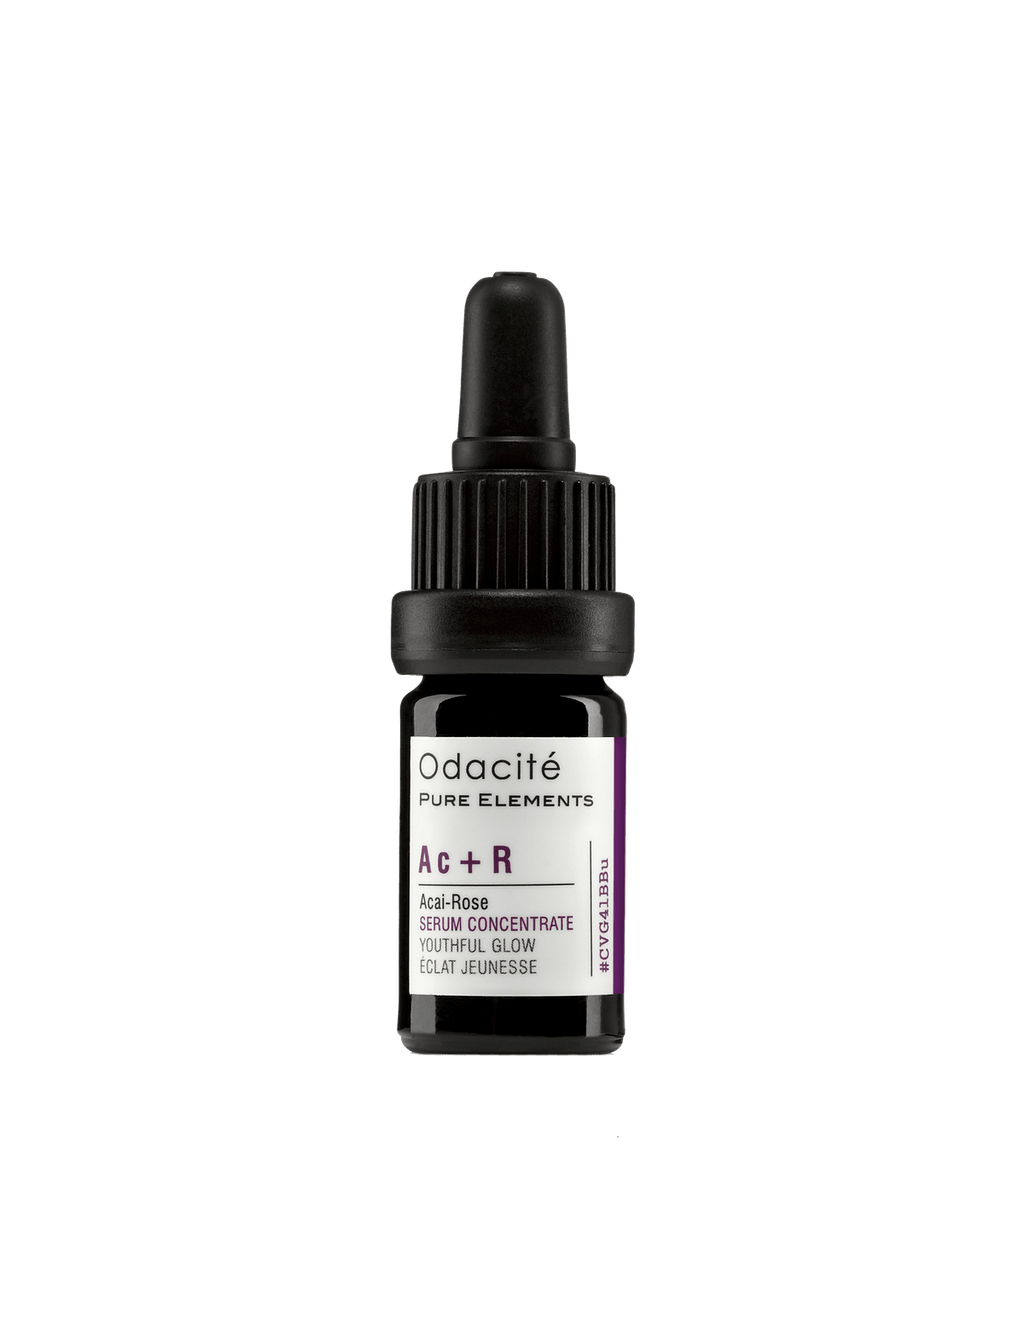 ODACITE - Ac+R: Youthful glow - The Natural Beauty Club